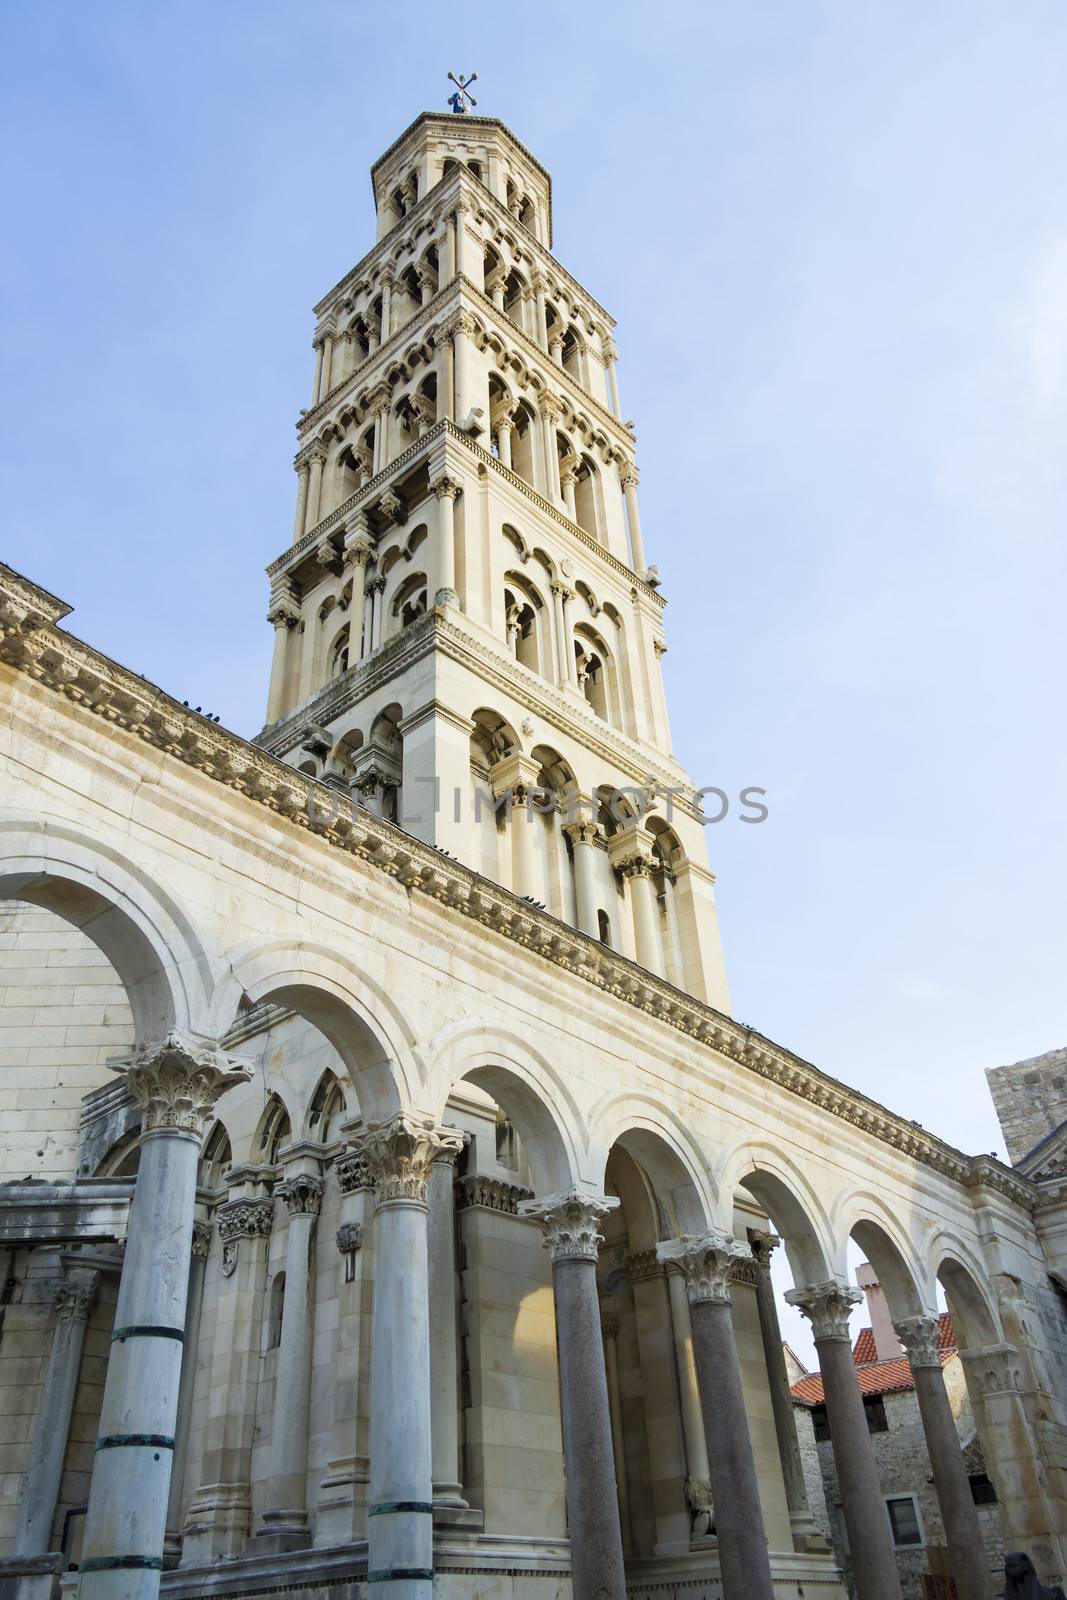 Diocletian palace ruins and cathedral bell tower, Split, Croatia.